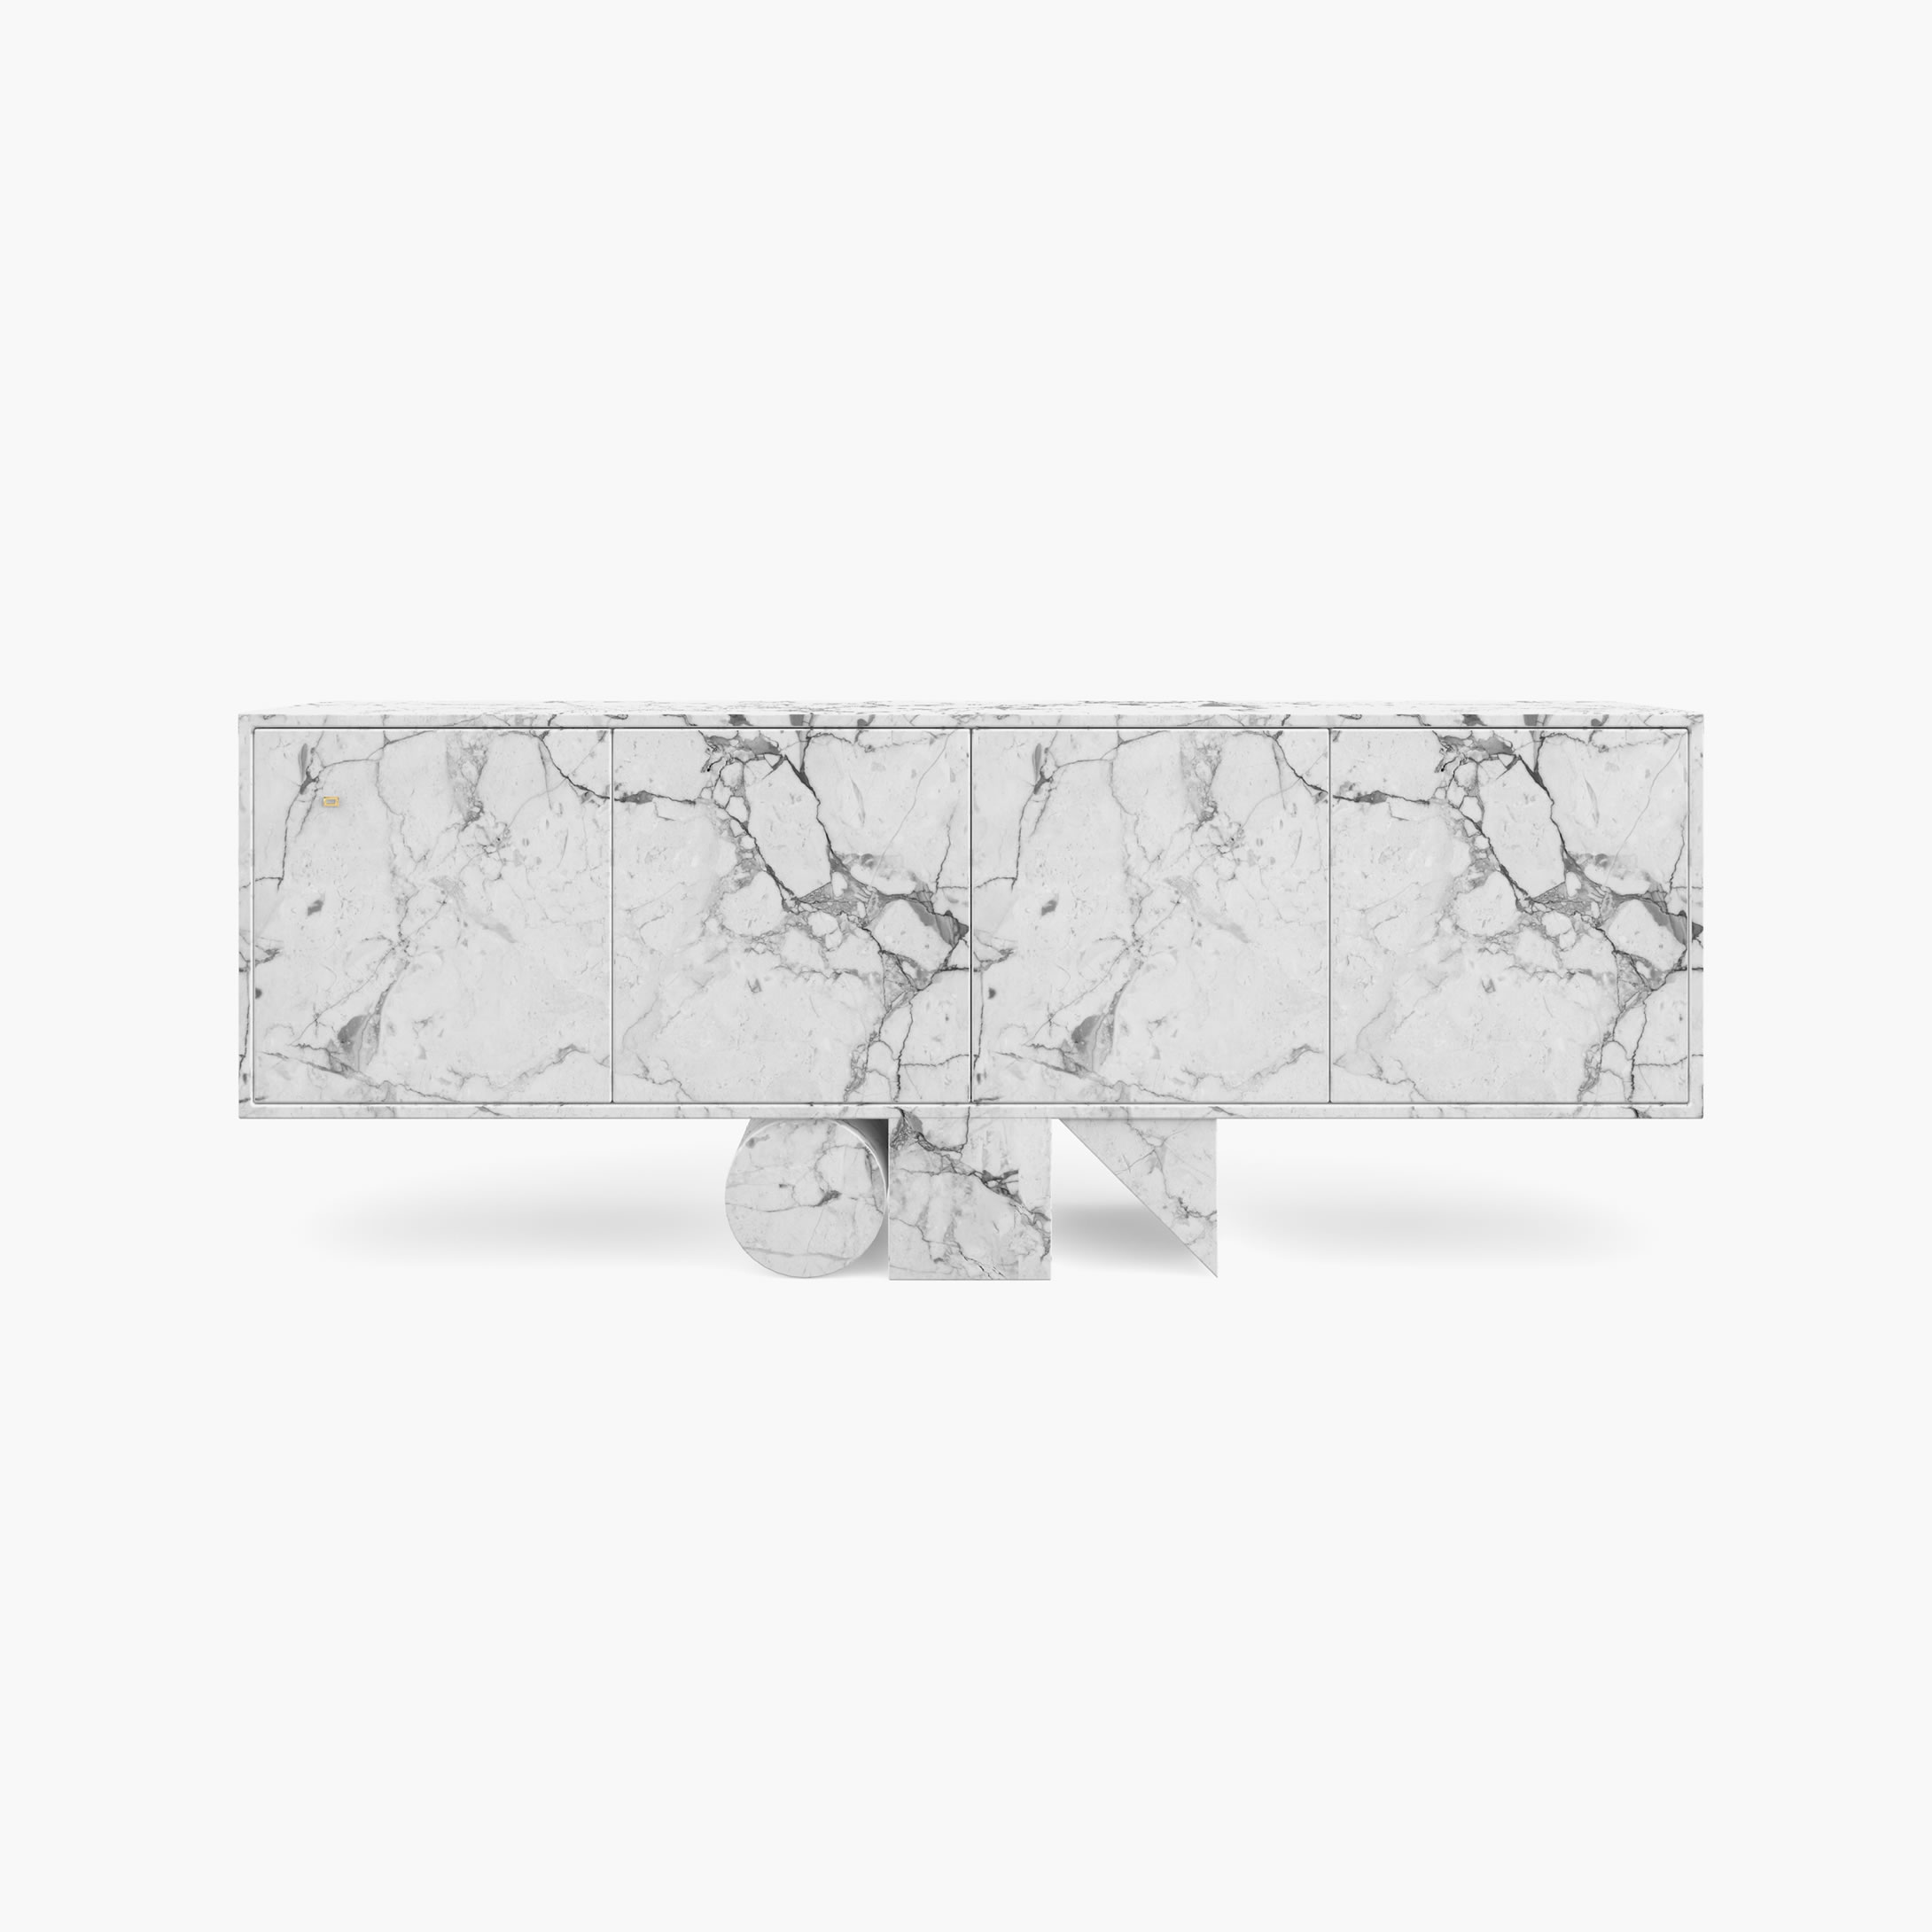 Sideboard Cylinder cuboid prism White Arabescato Marble futuristic Living Room Luxury Consoles  Sideboards FS 151 A FELIX SCHWAKE